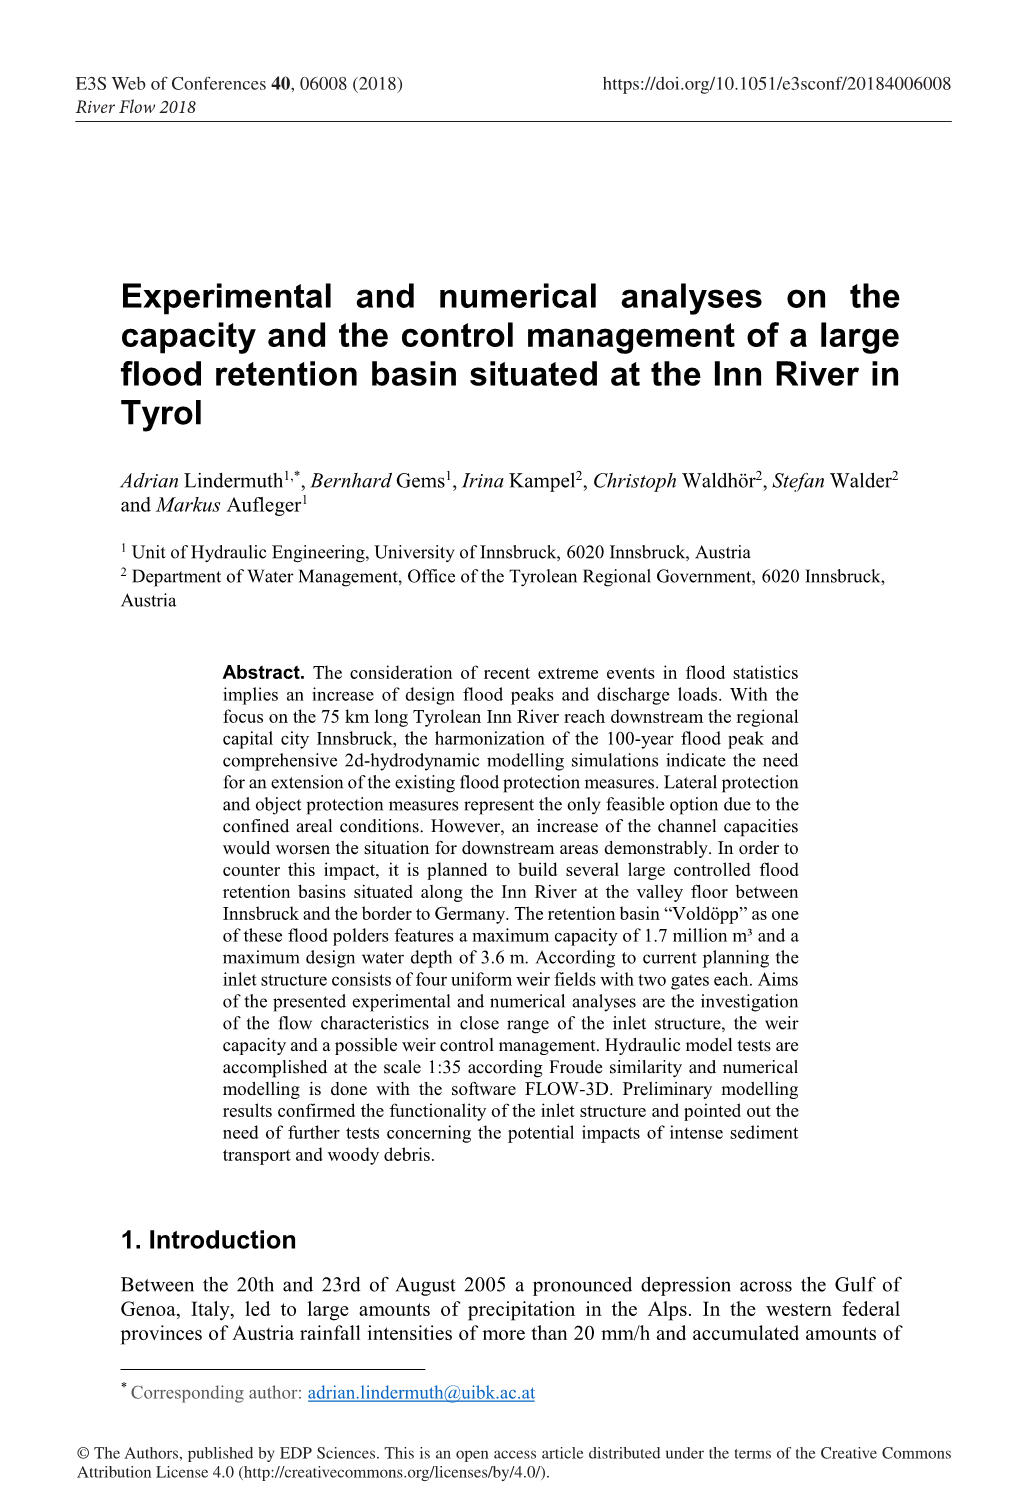 Experimental and Numerical Analyses on the Capacity and the Control Management of a Large Flood Retention Basin Situated at the Inn River in Tyrol